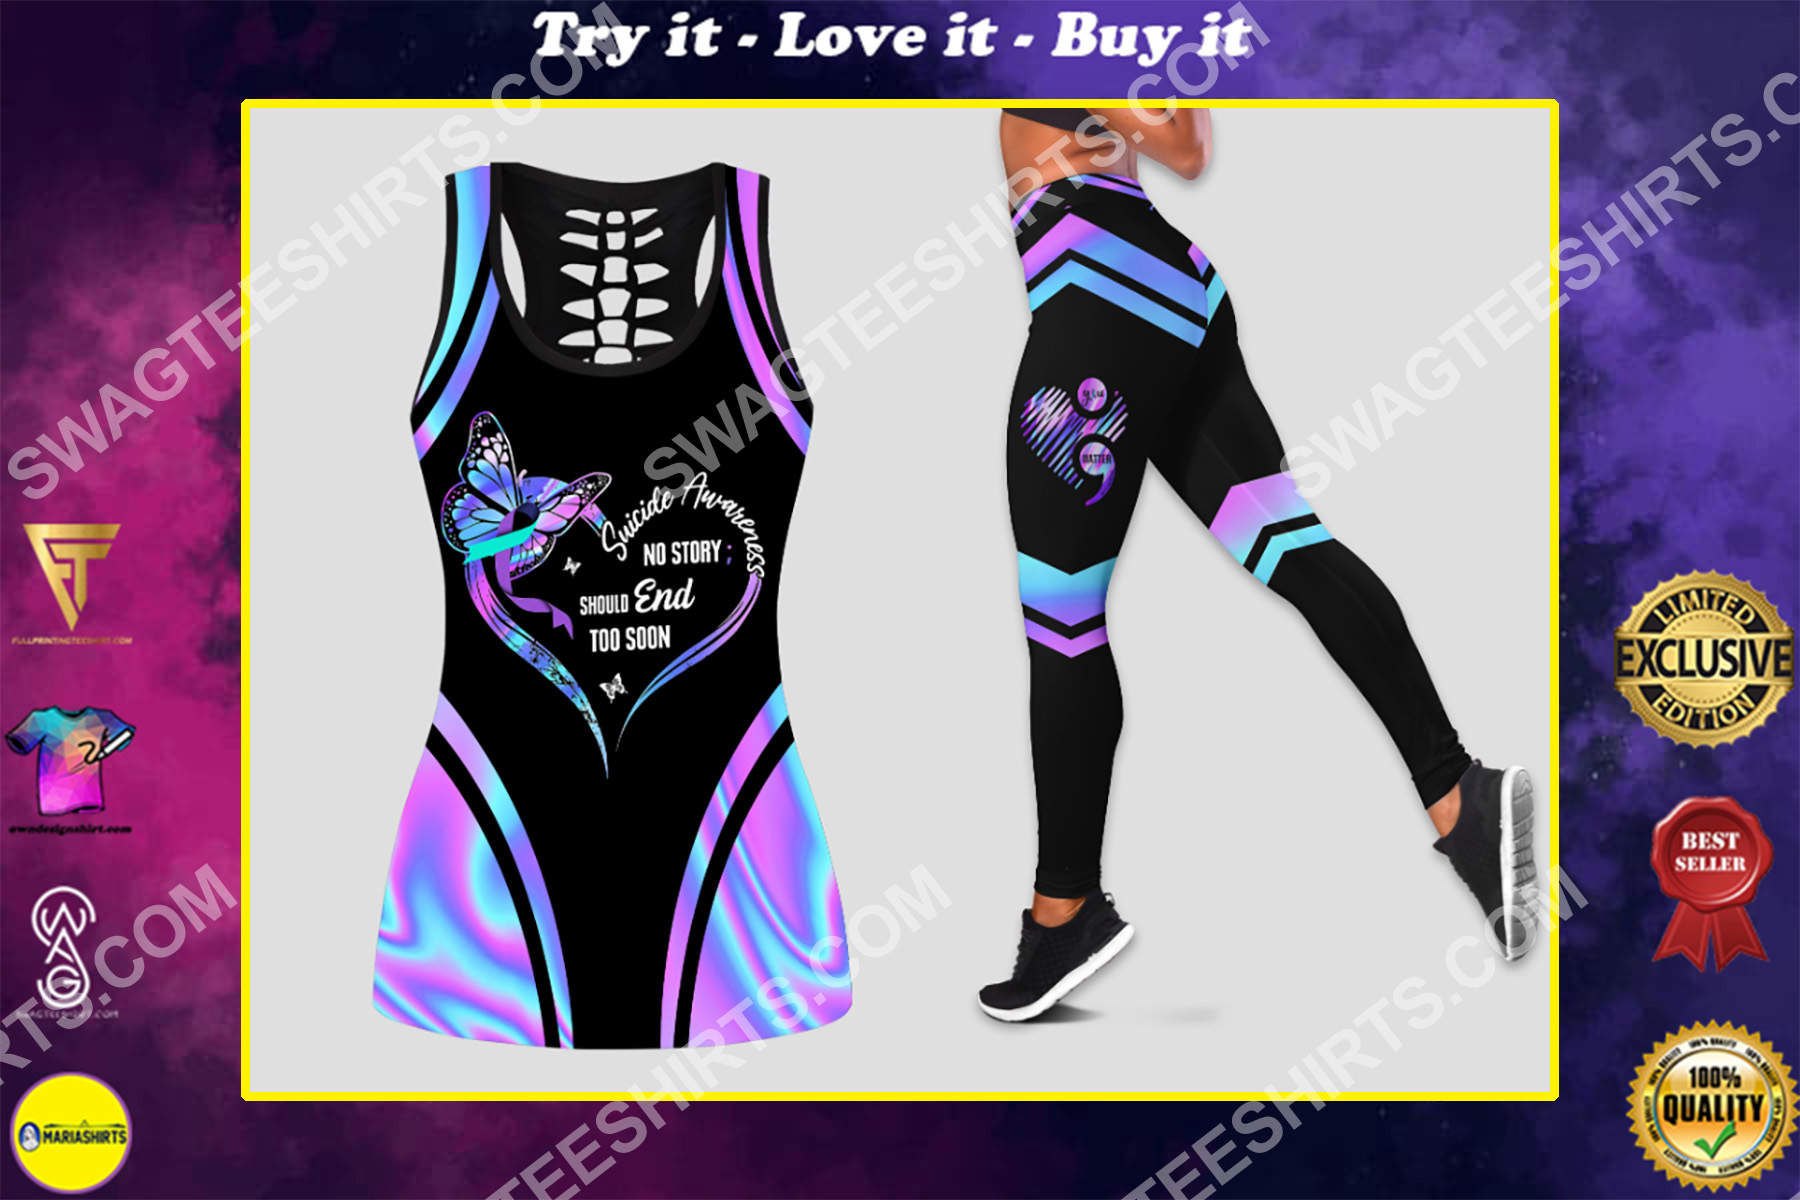 suicide awareness no story should end too soon set sports outfit